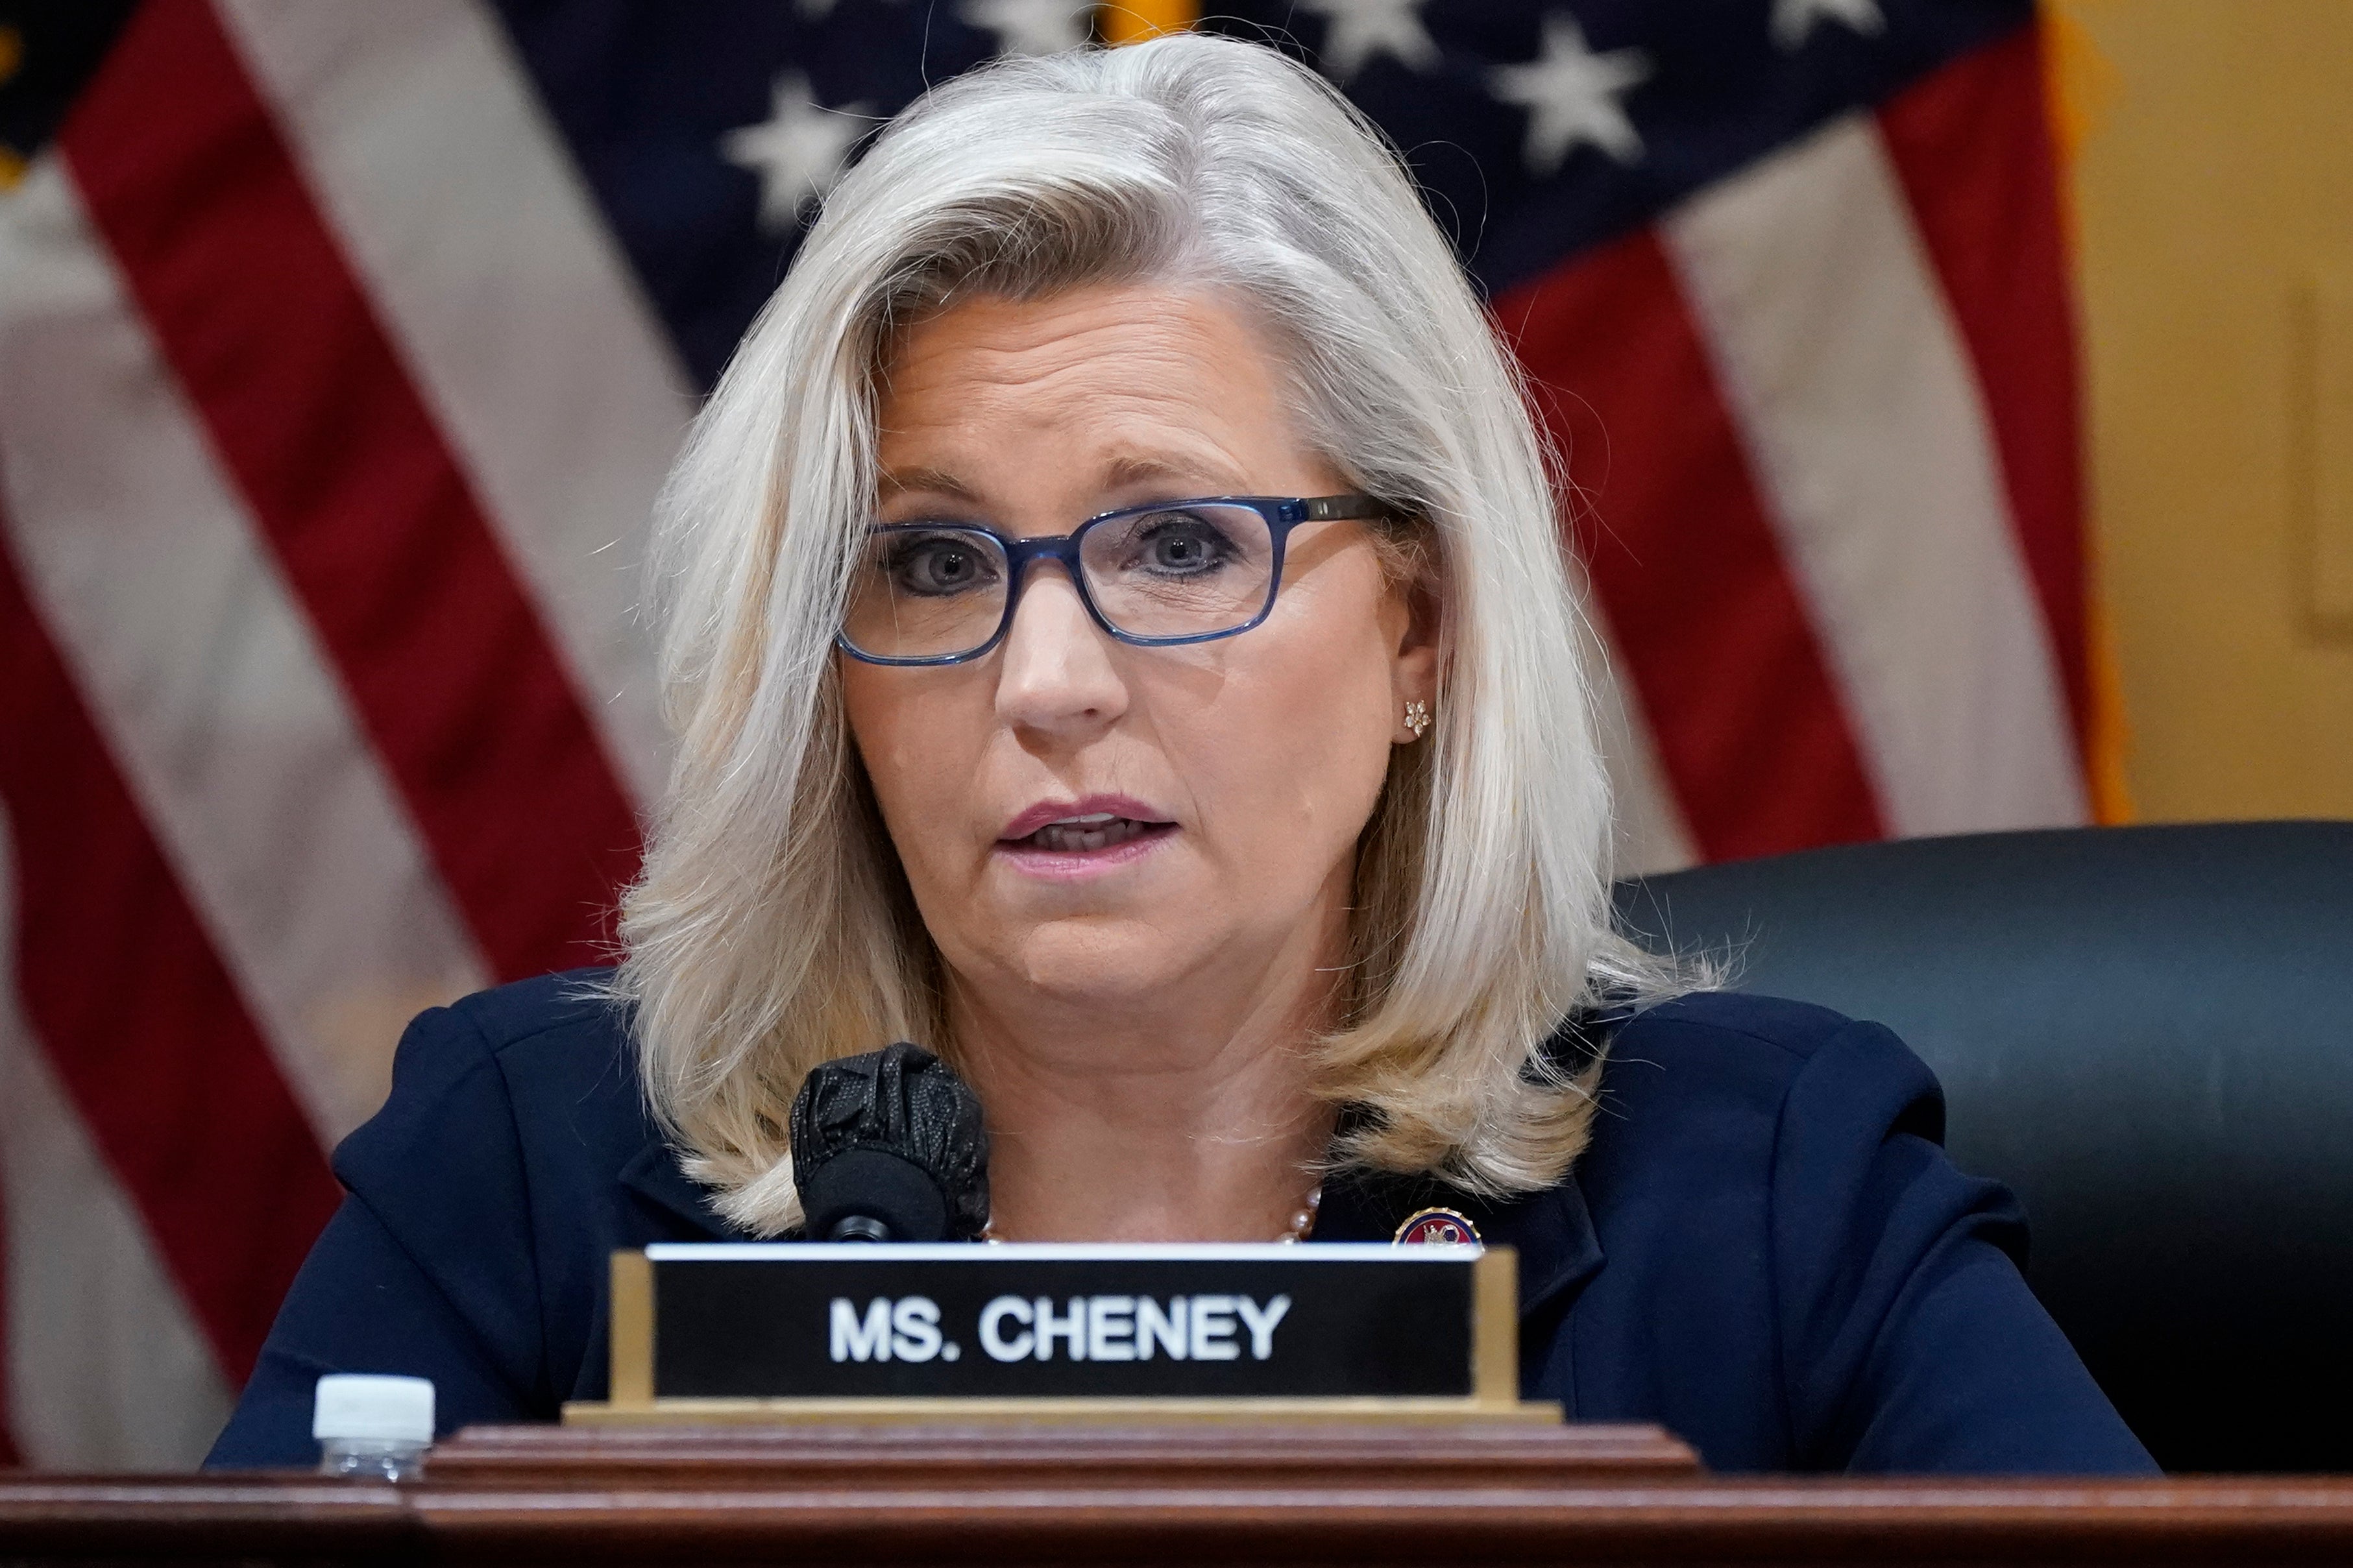 The committee’s ranking Republican Liz Cheney